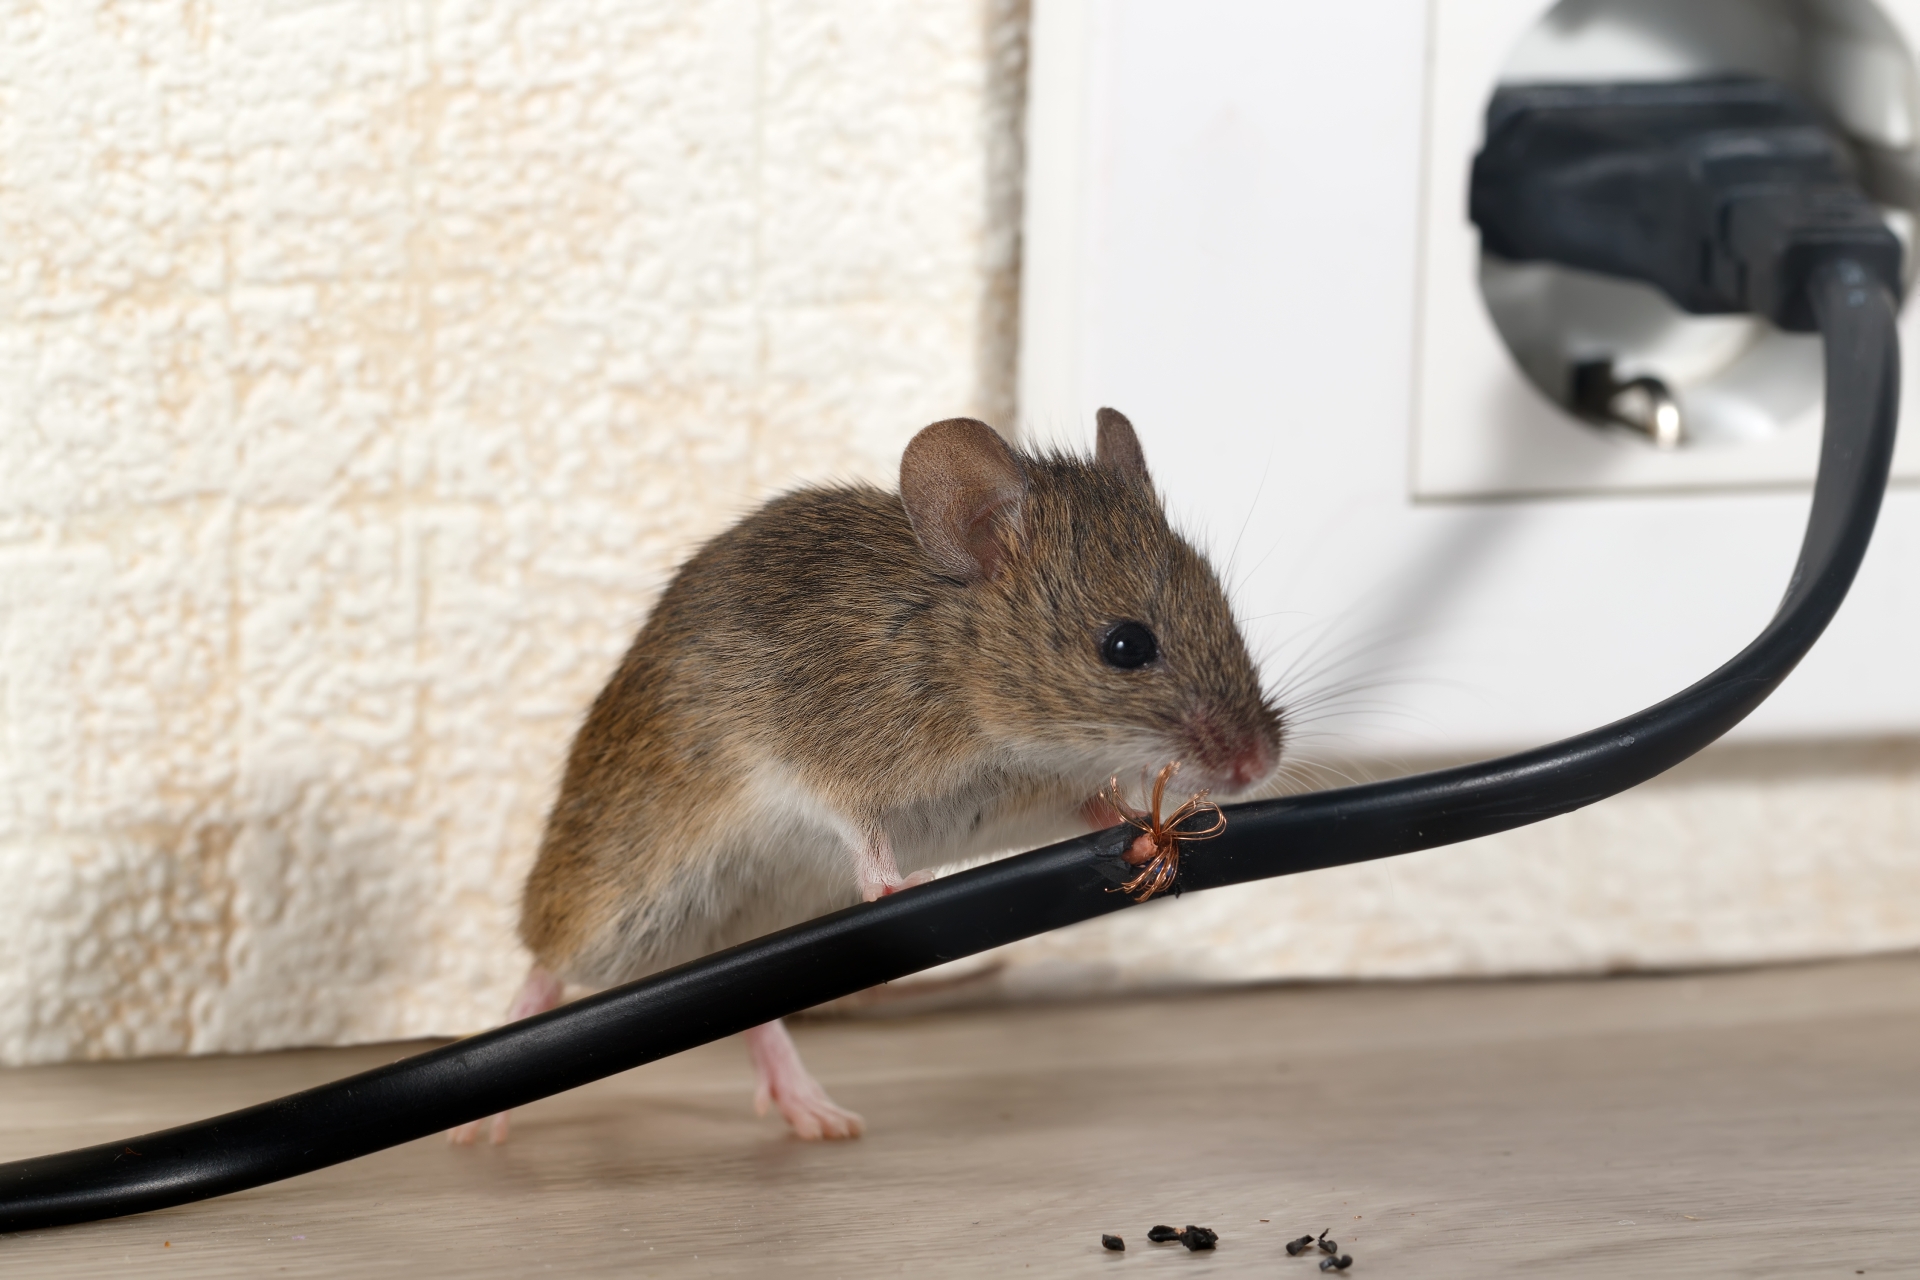 Mice Infestation, Pest Control in South Lambeth, SW8. Call Now 020 8166 9746